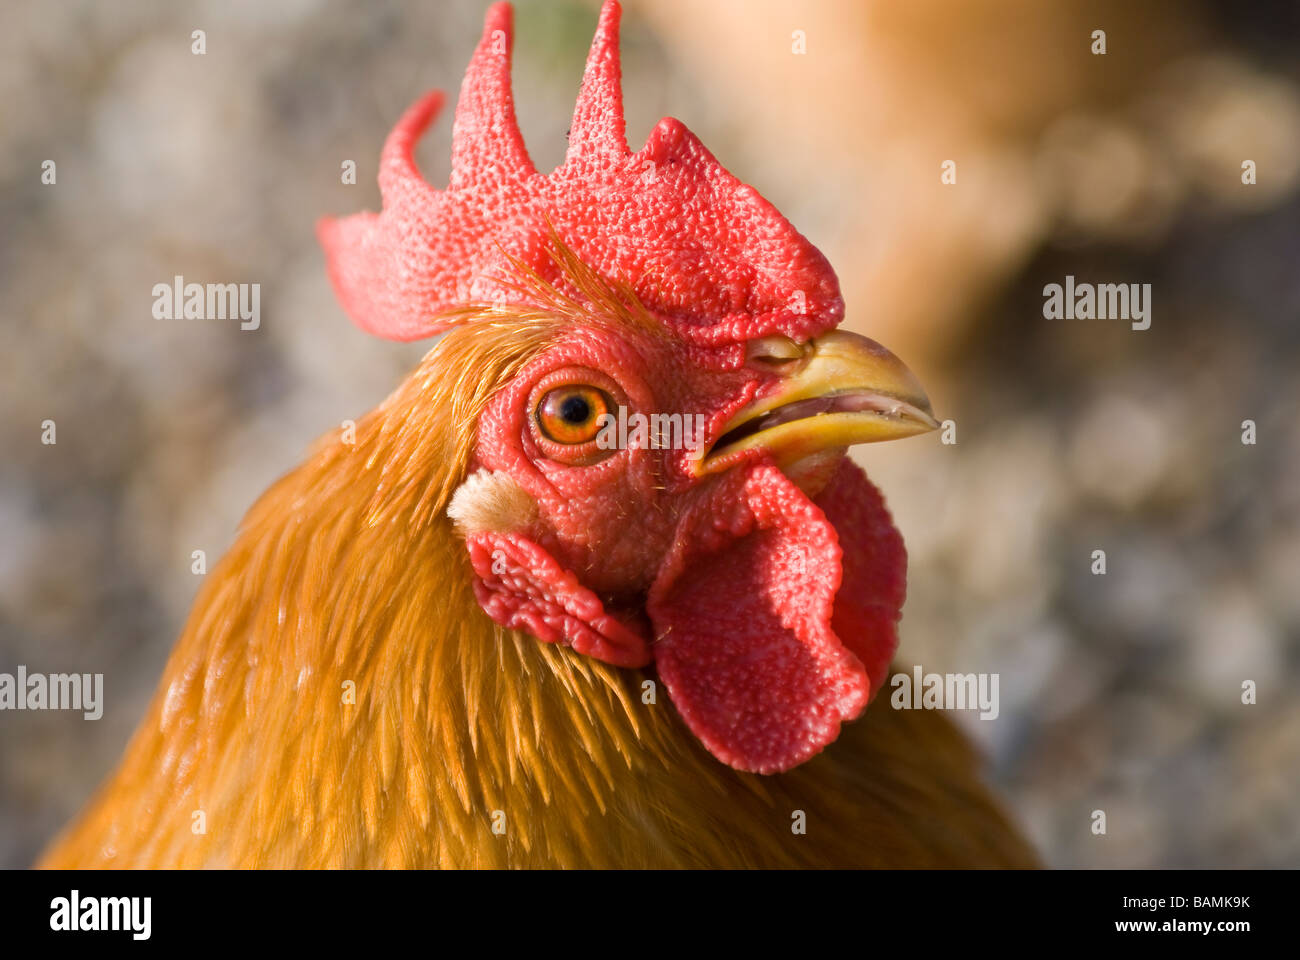 Close up of the head of a cockerel showing red comb and wattles Stock Photo